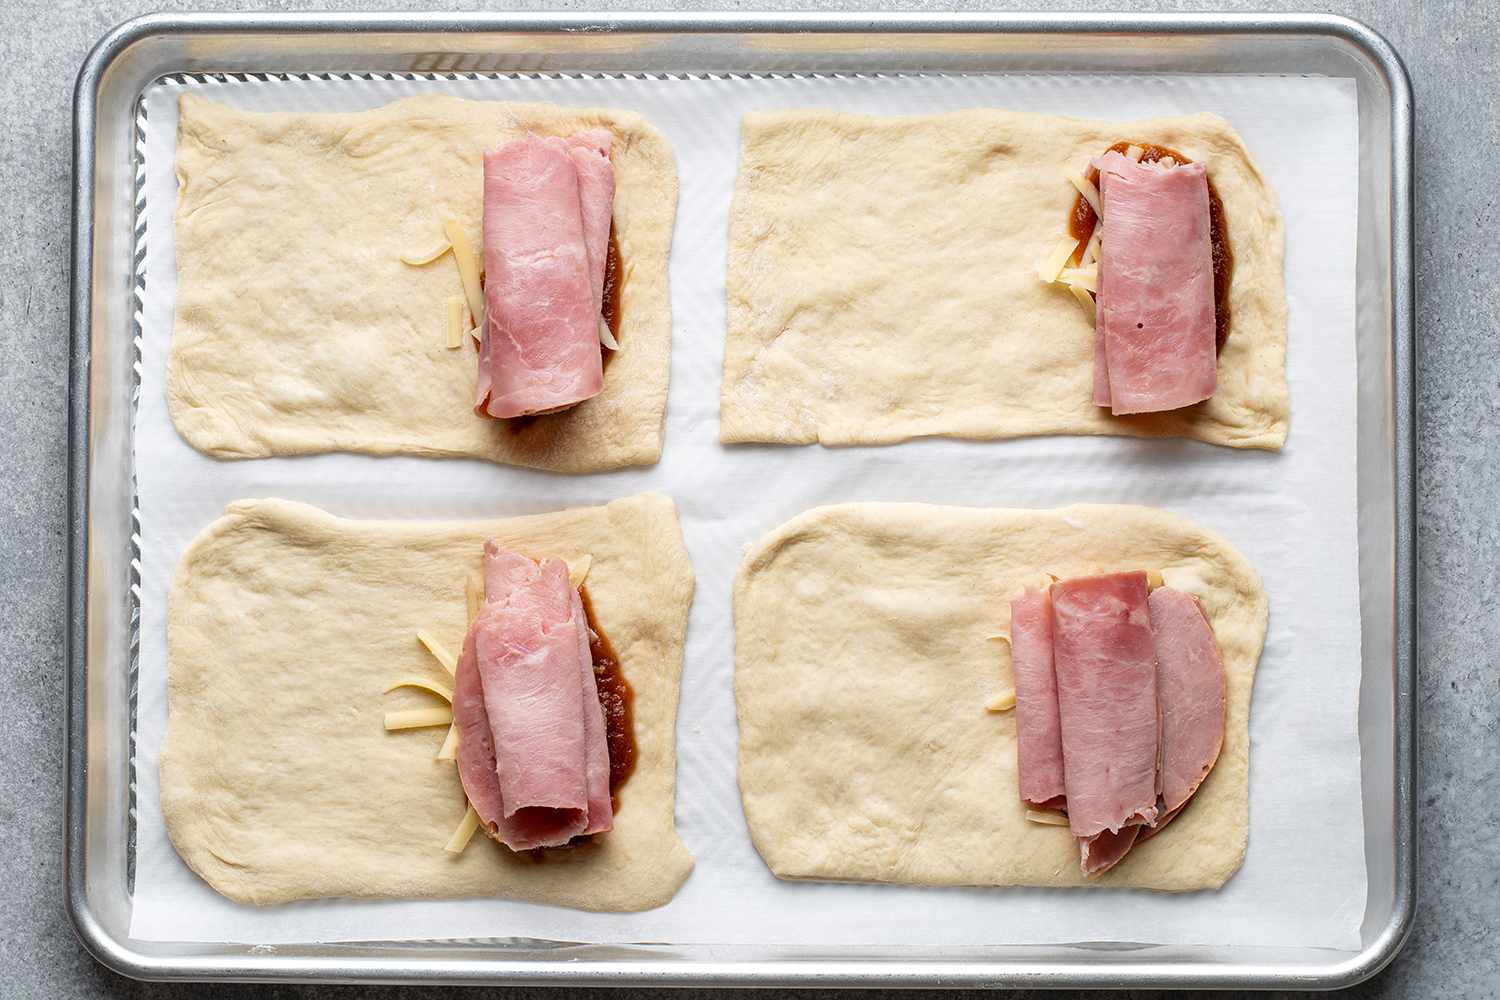 rolled up deli meat on unbaked rectangular pieces of bread dough